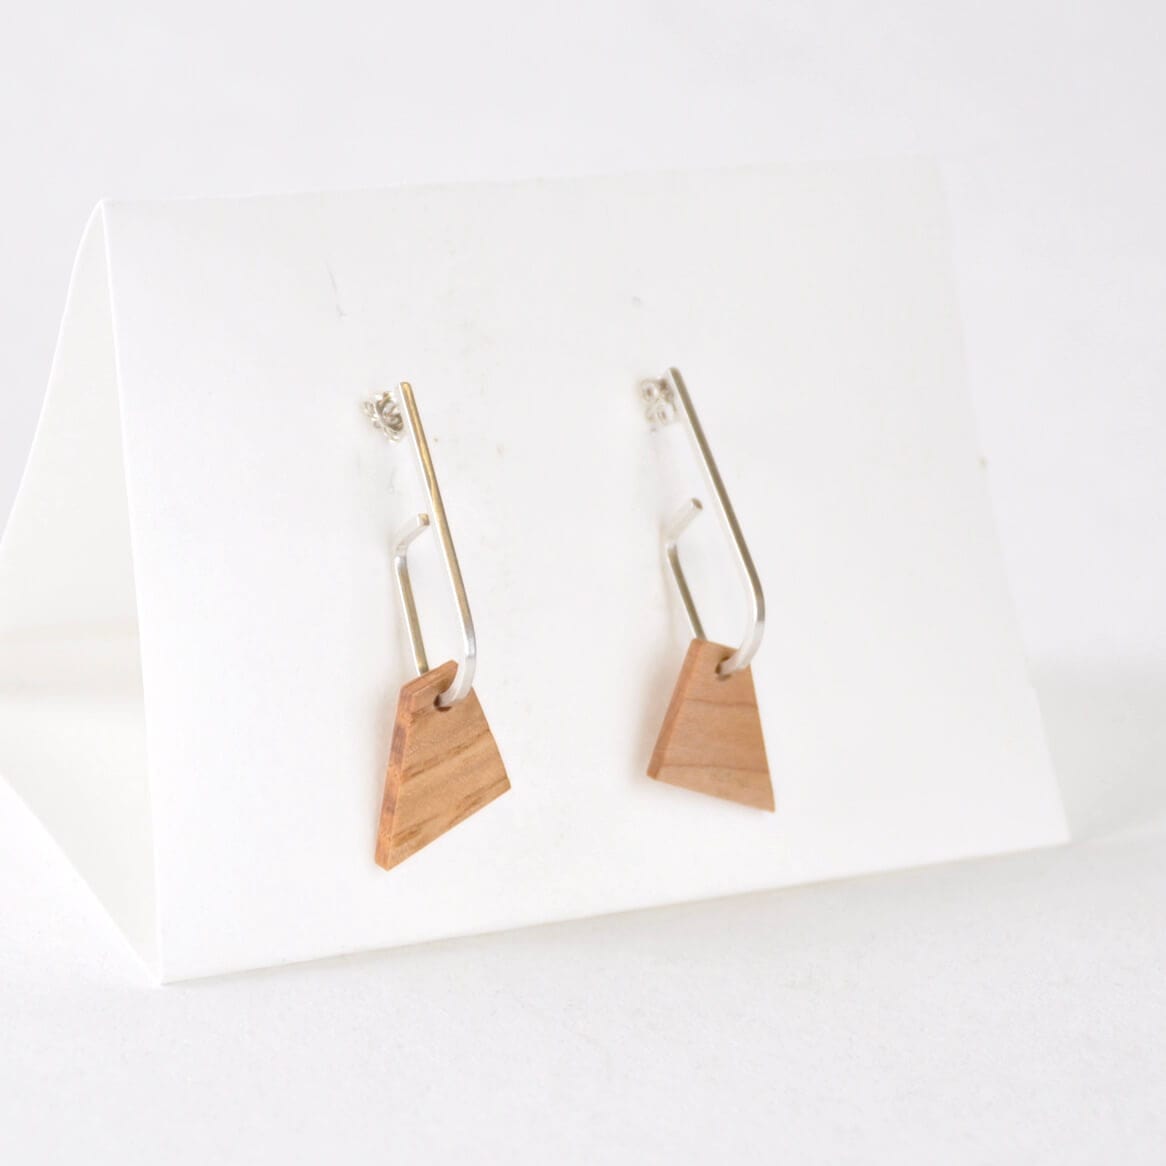 Priormade Woods b - Oak ‘Jay x Wood ’ - Eco Silver and Reclaimed Wooden Earrings (multiple styles)